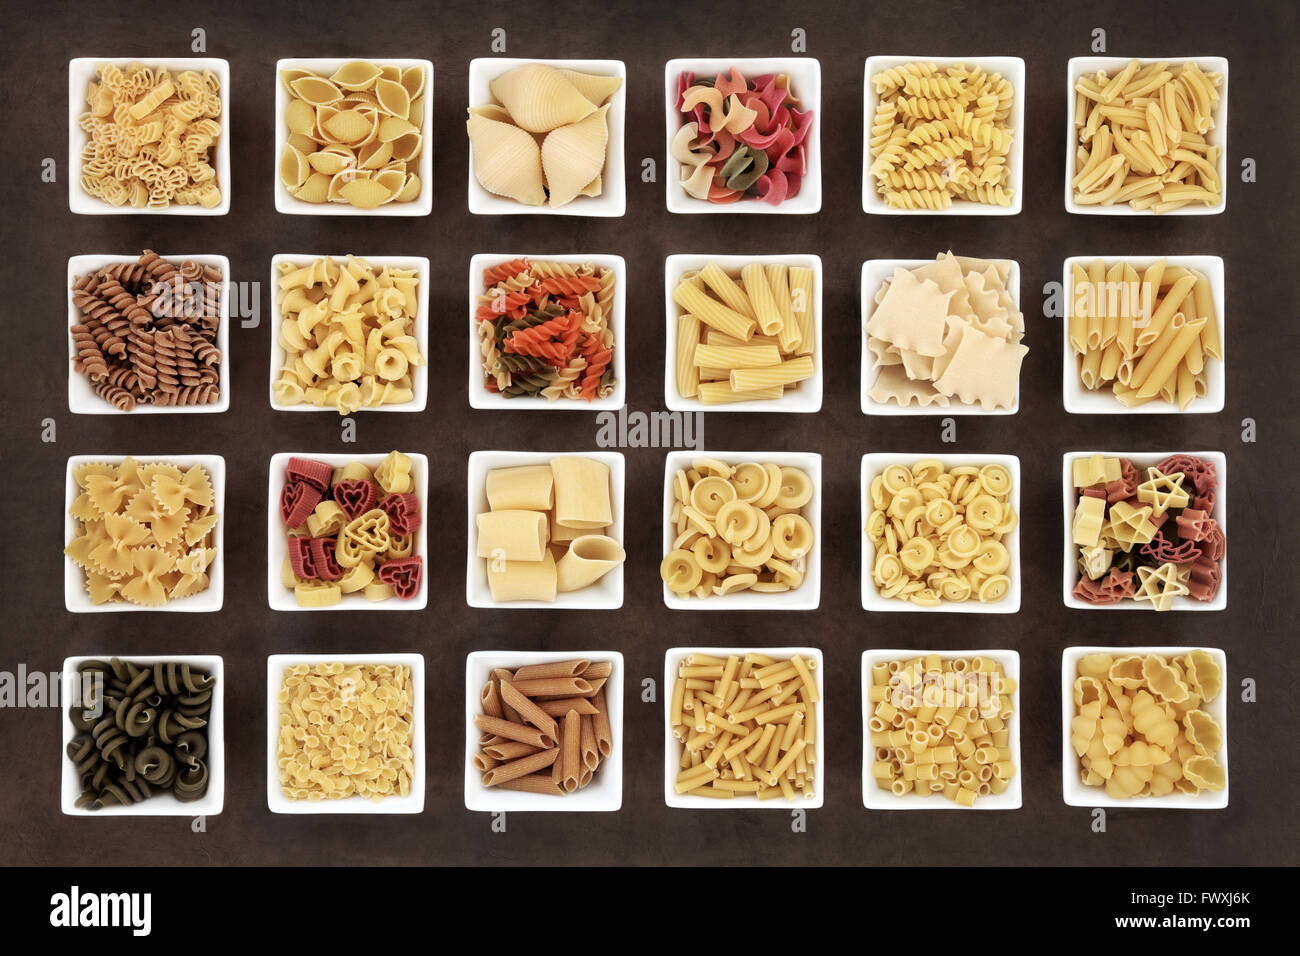 Large italian pasta dried food collection in square bowls over brown lokta paper background. Stock Photo